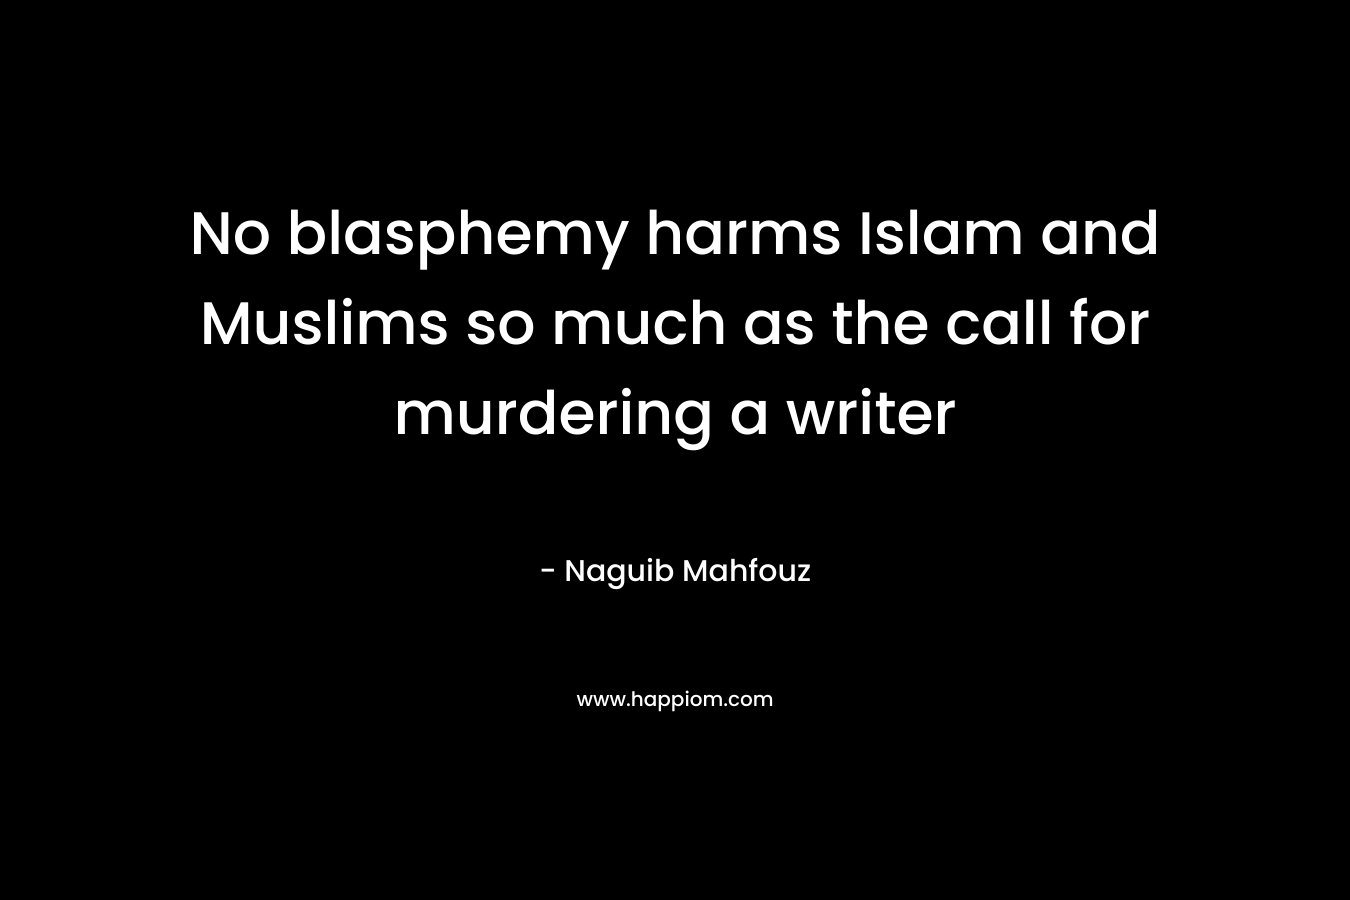 No blasphemy harms Islam and Muslims so much as the call for murdering a writer